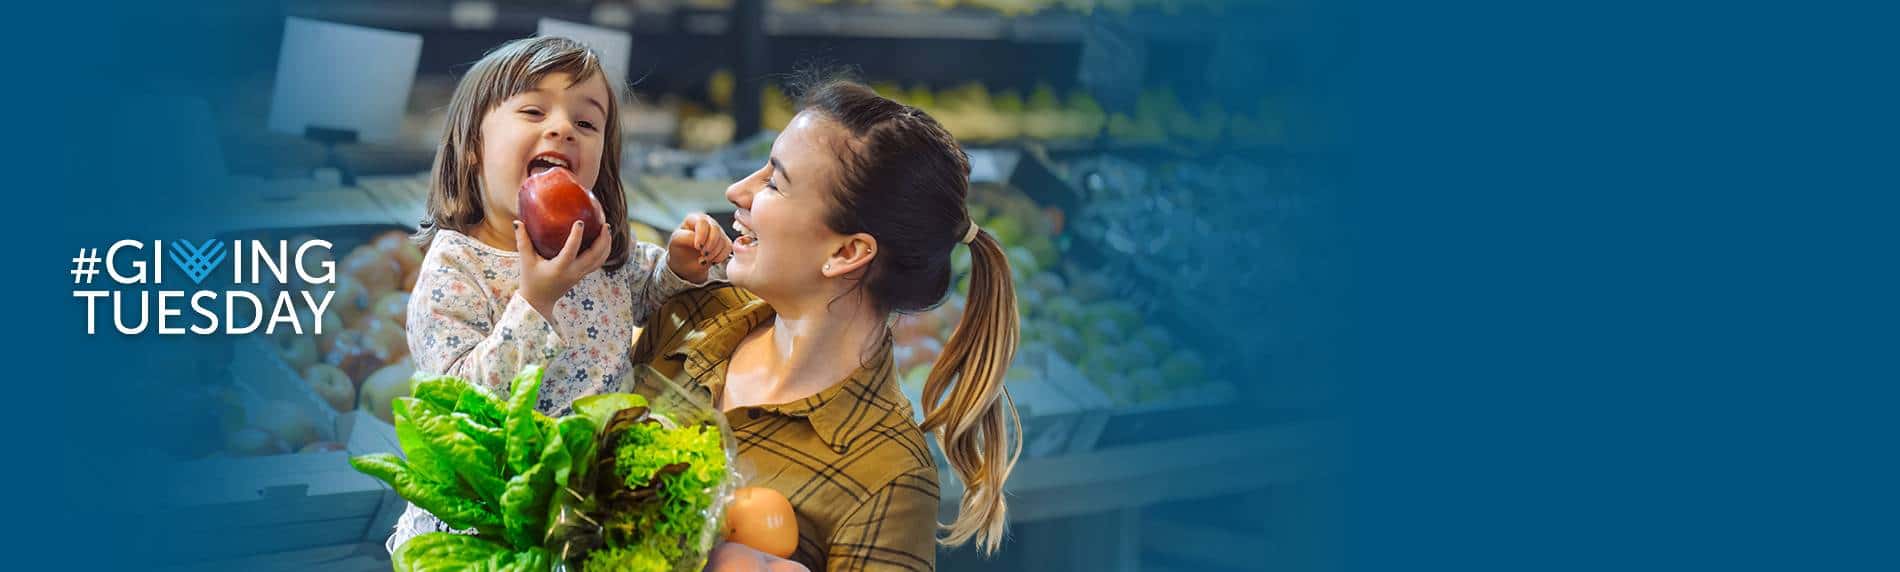 Woman holding young girl in grocery store eating an apple